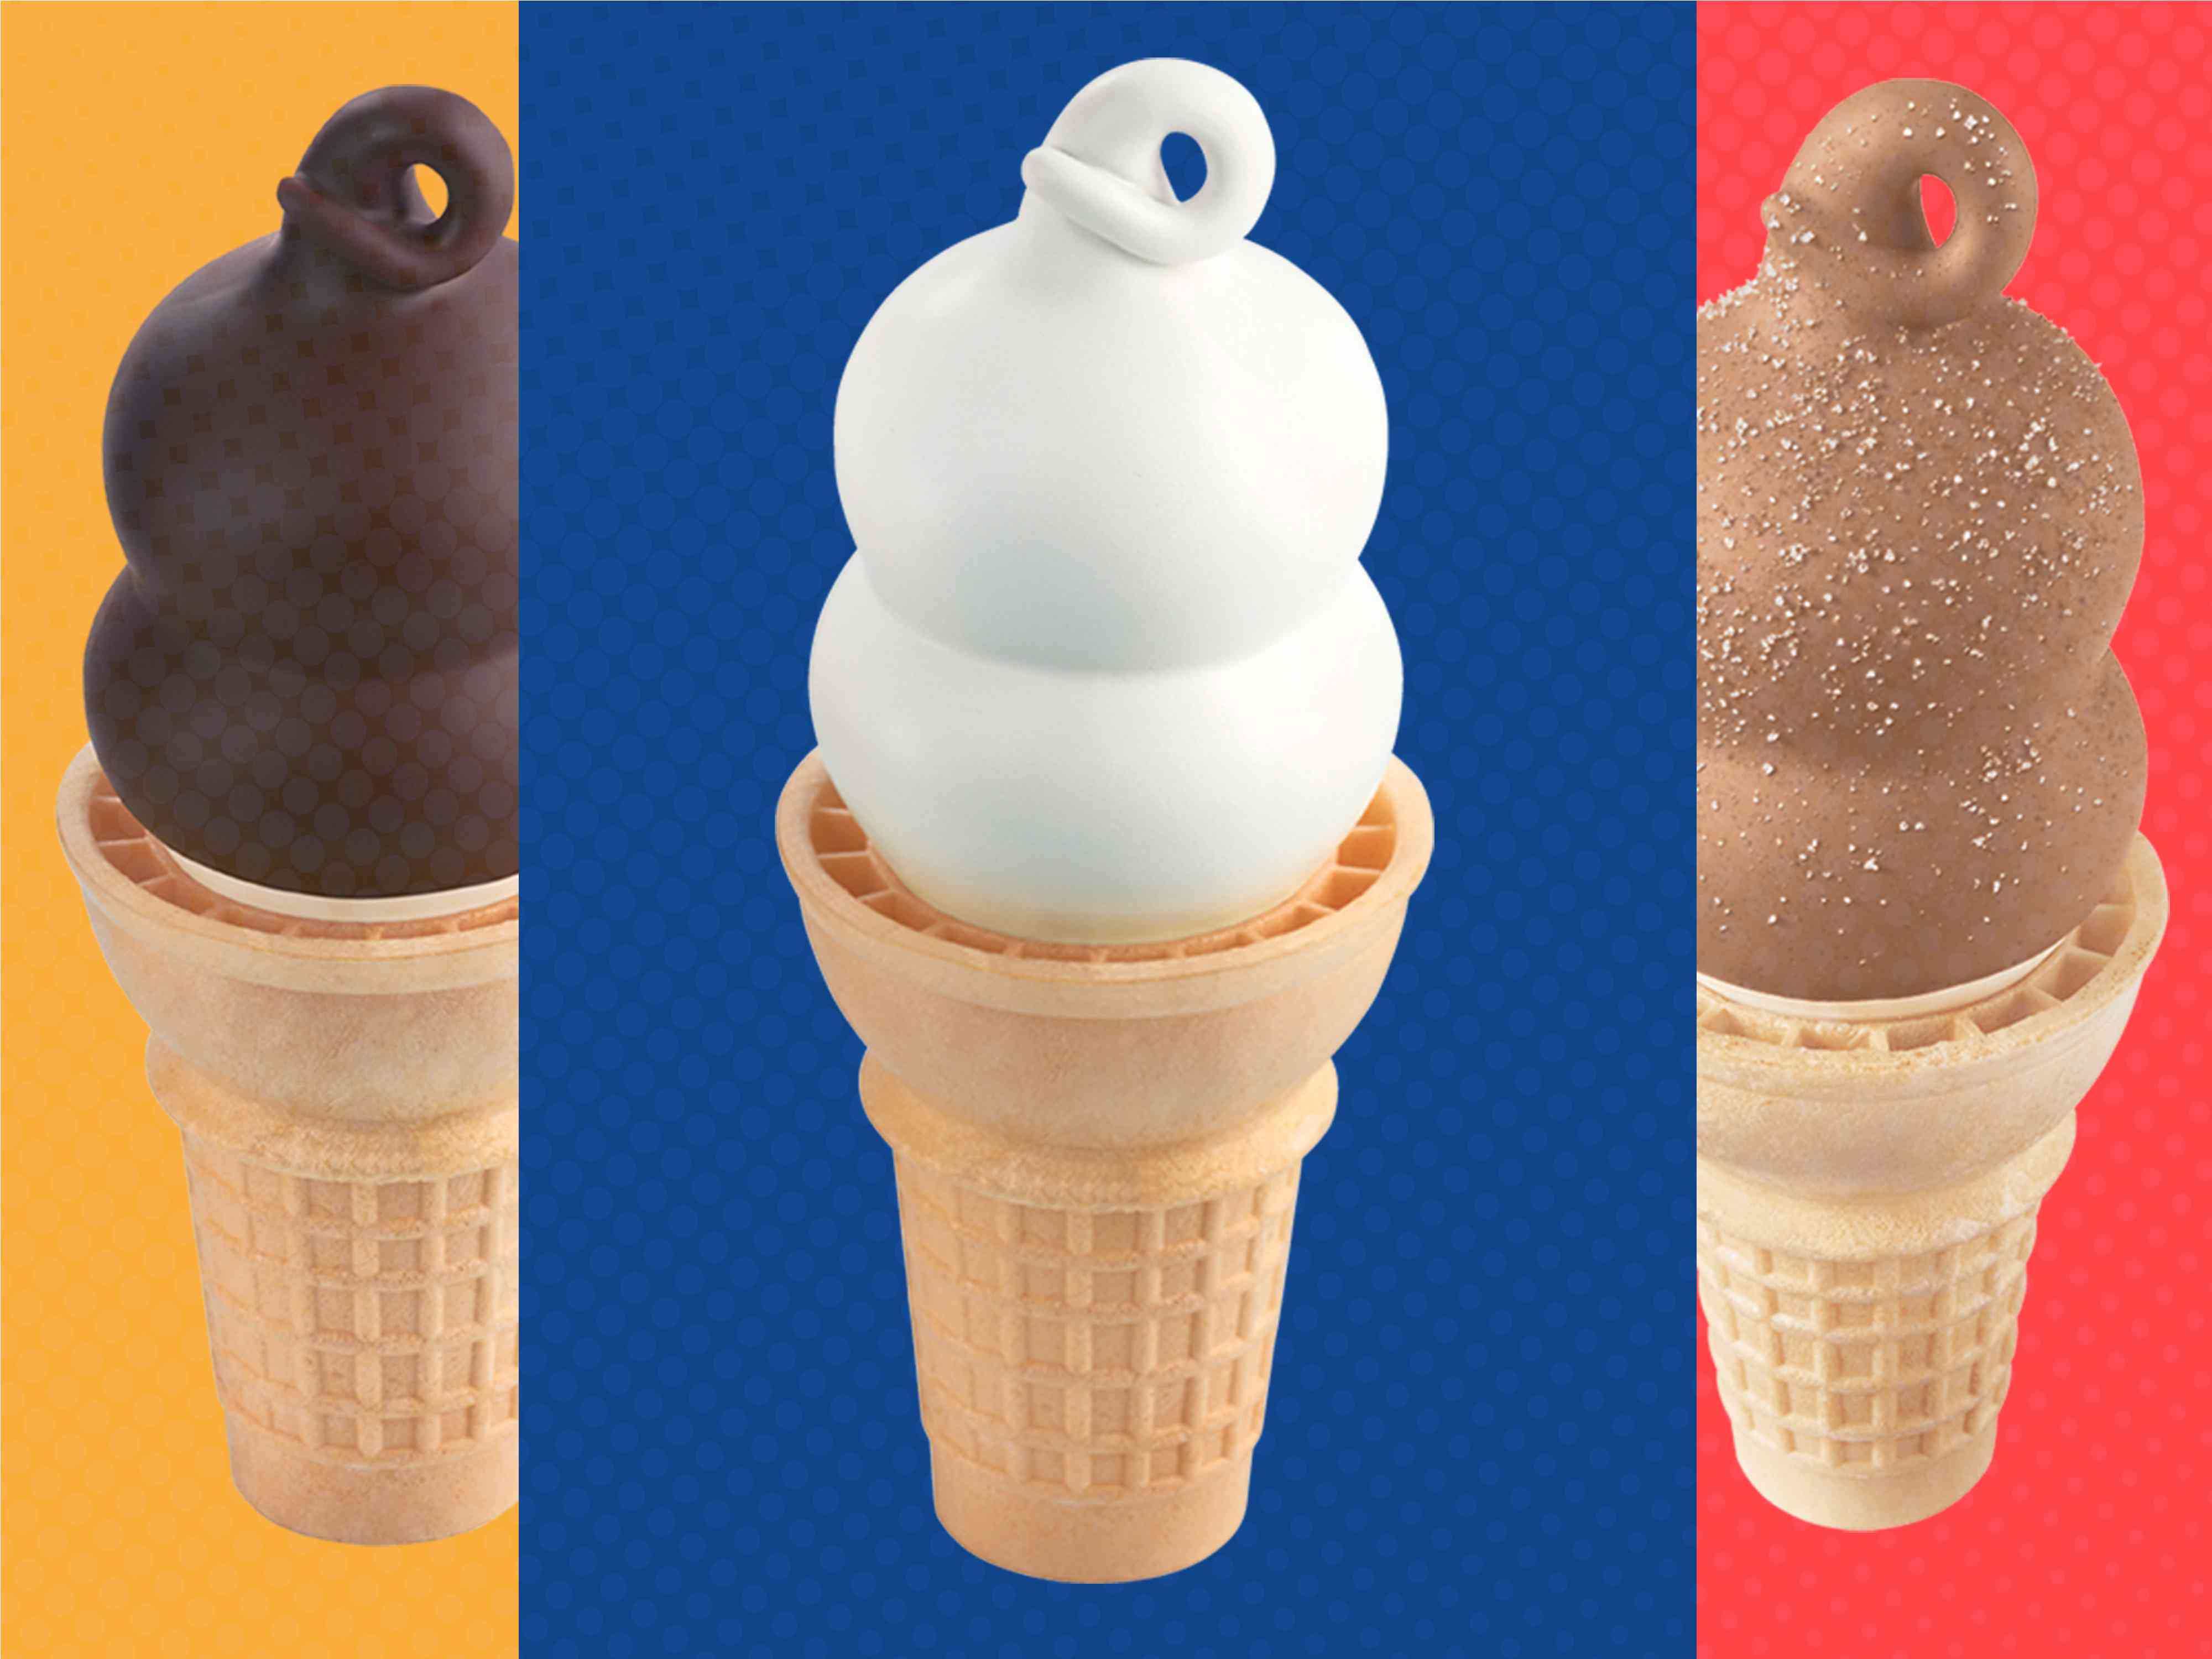 Dairy Queen Has an All-New Dipped Cone